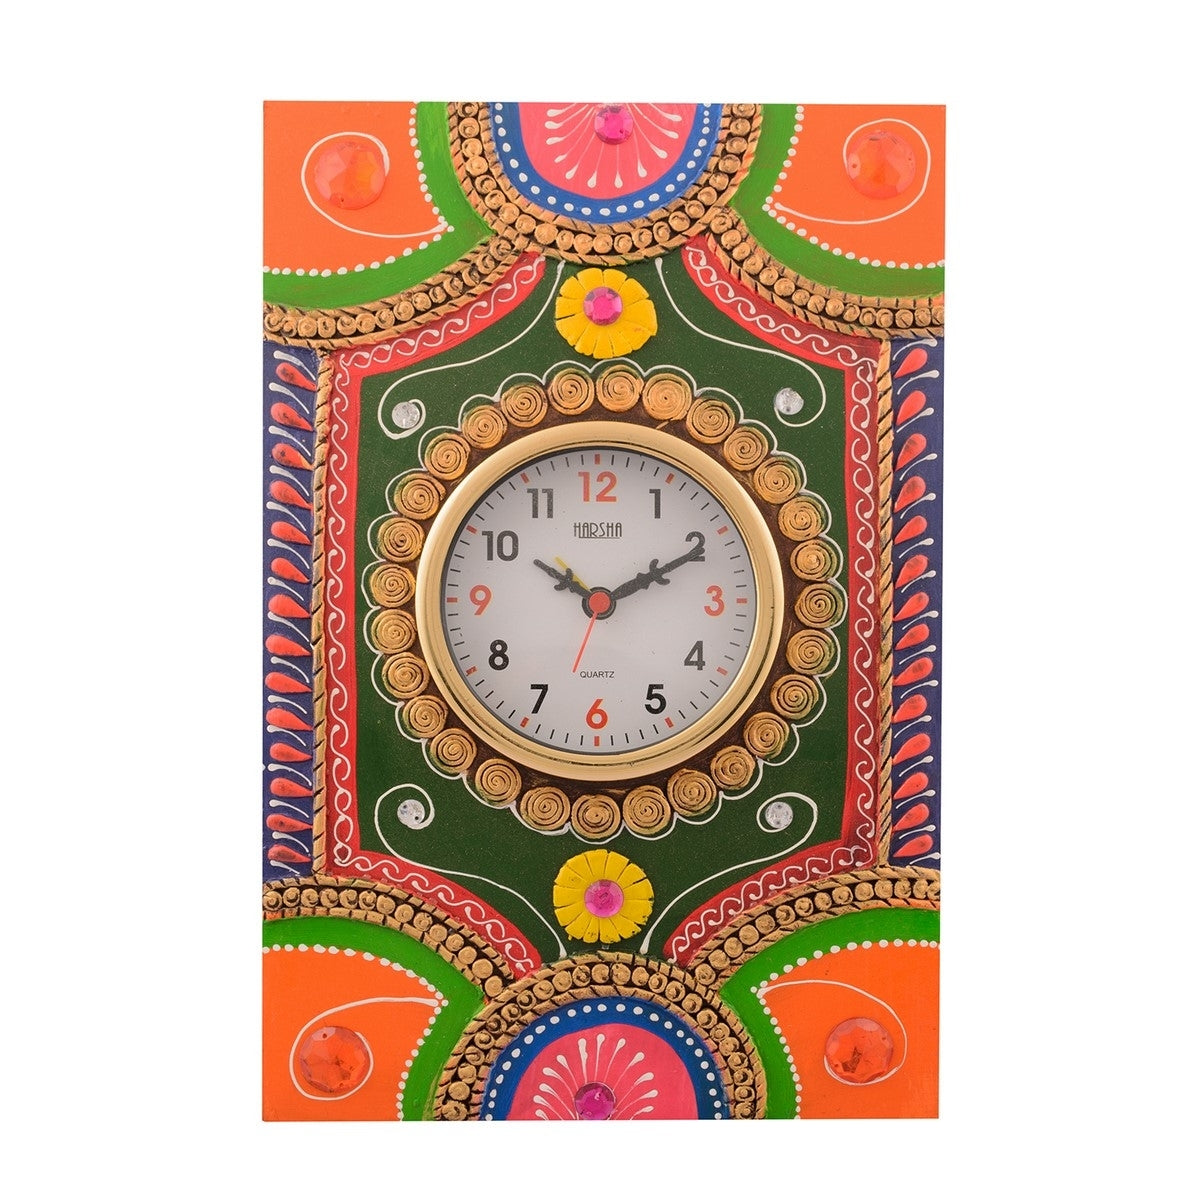 Wooden Papier Mache Traditional Work Artistic Handcrafted Wall Clock